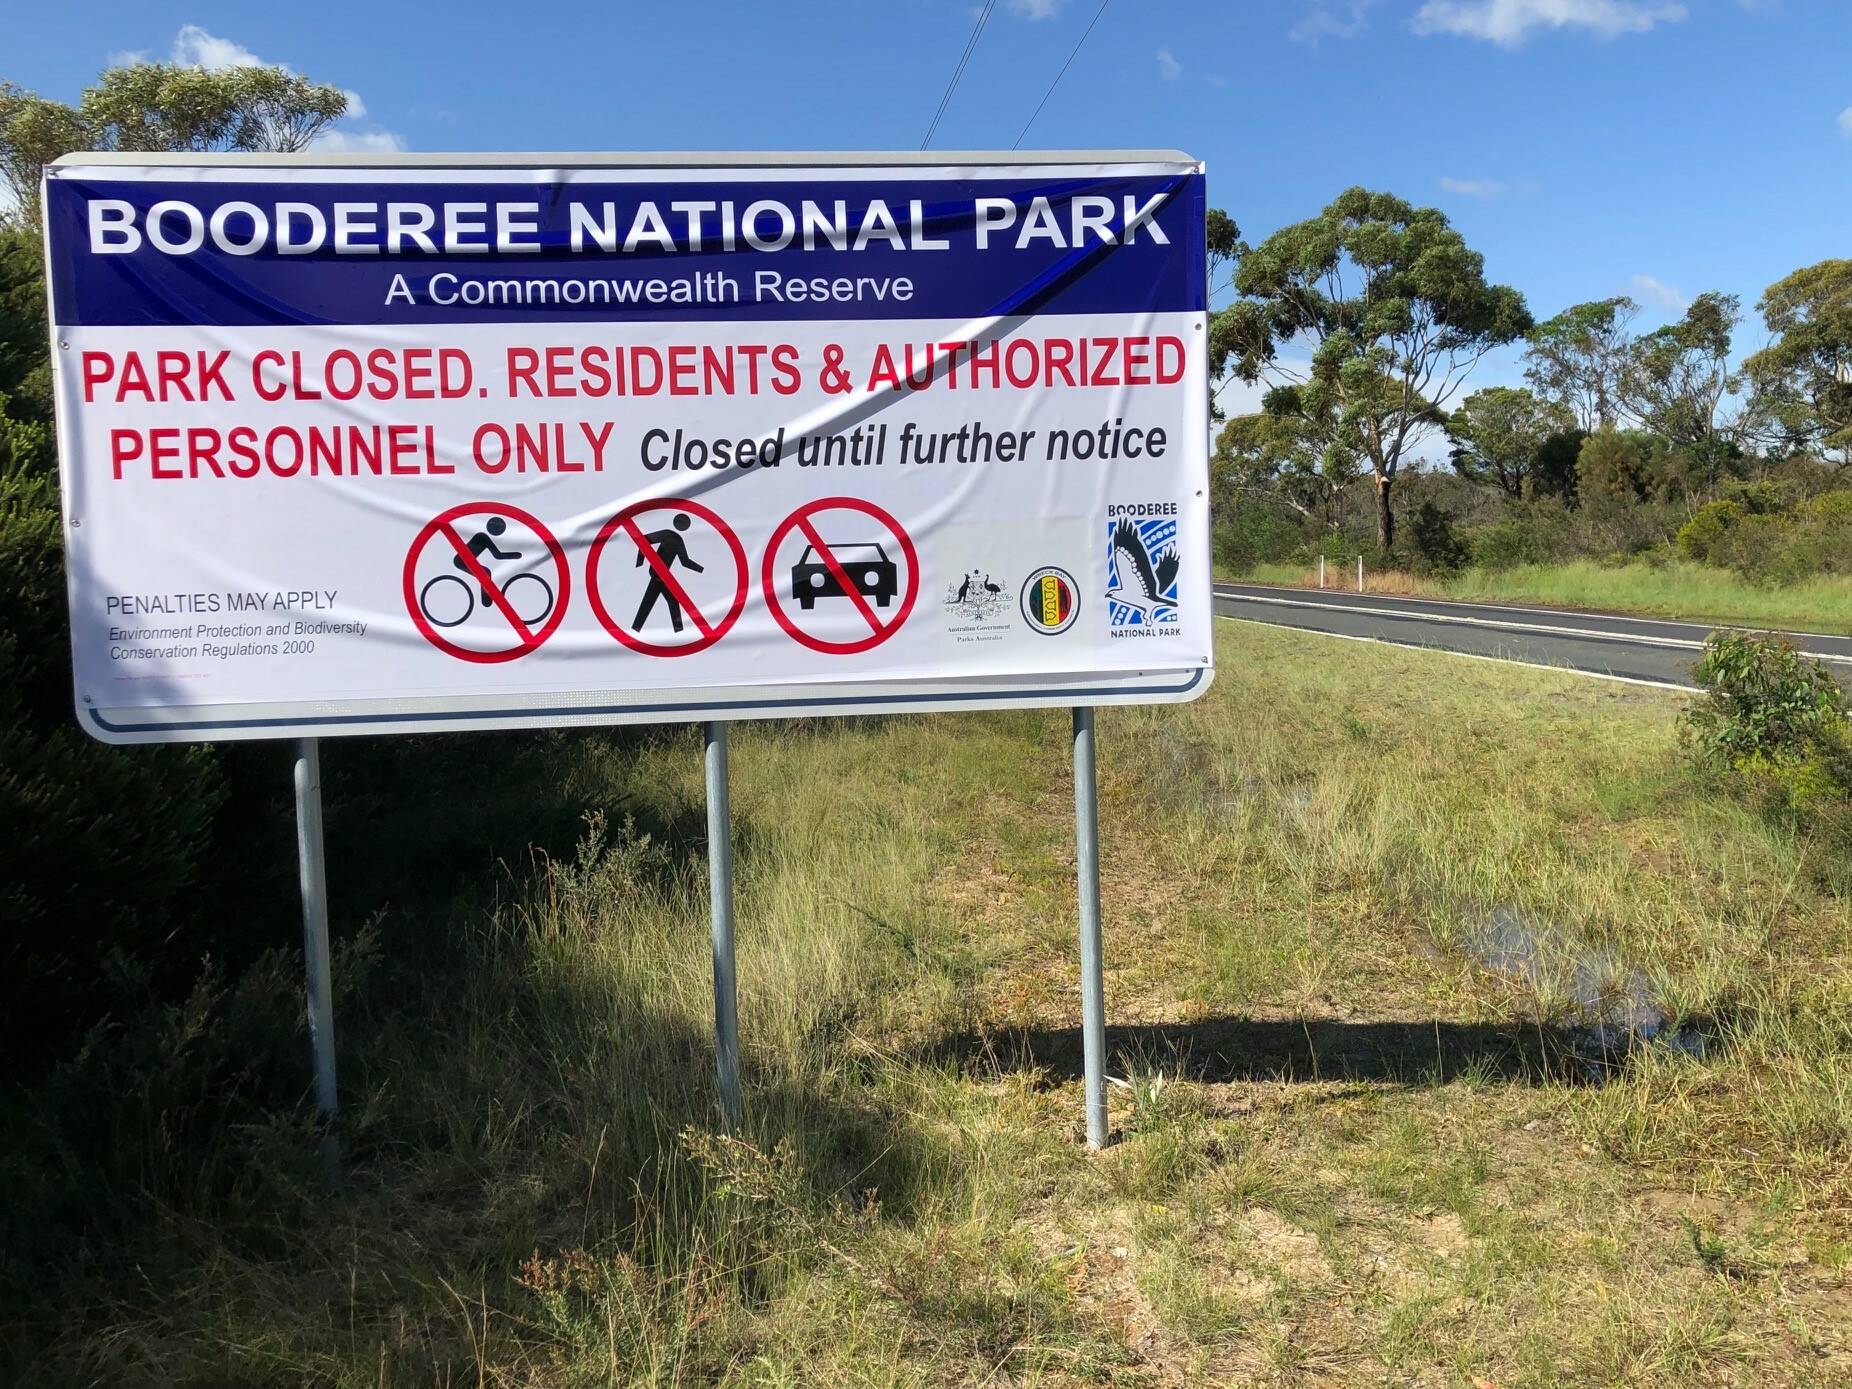 Booderee National Park is closed to all non-residents - that means